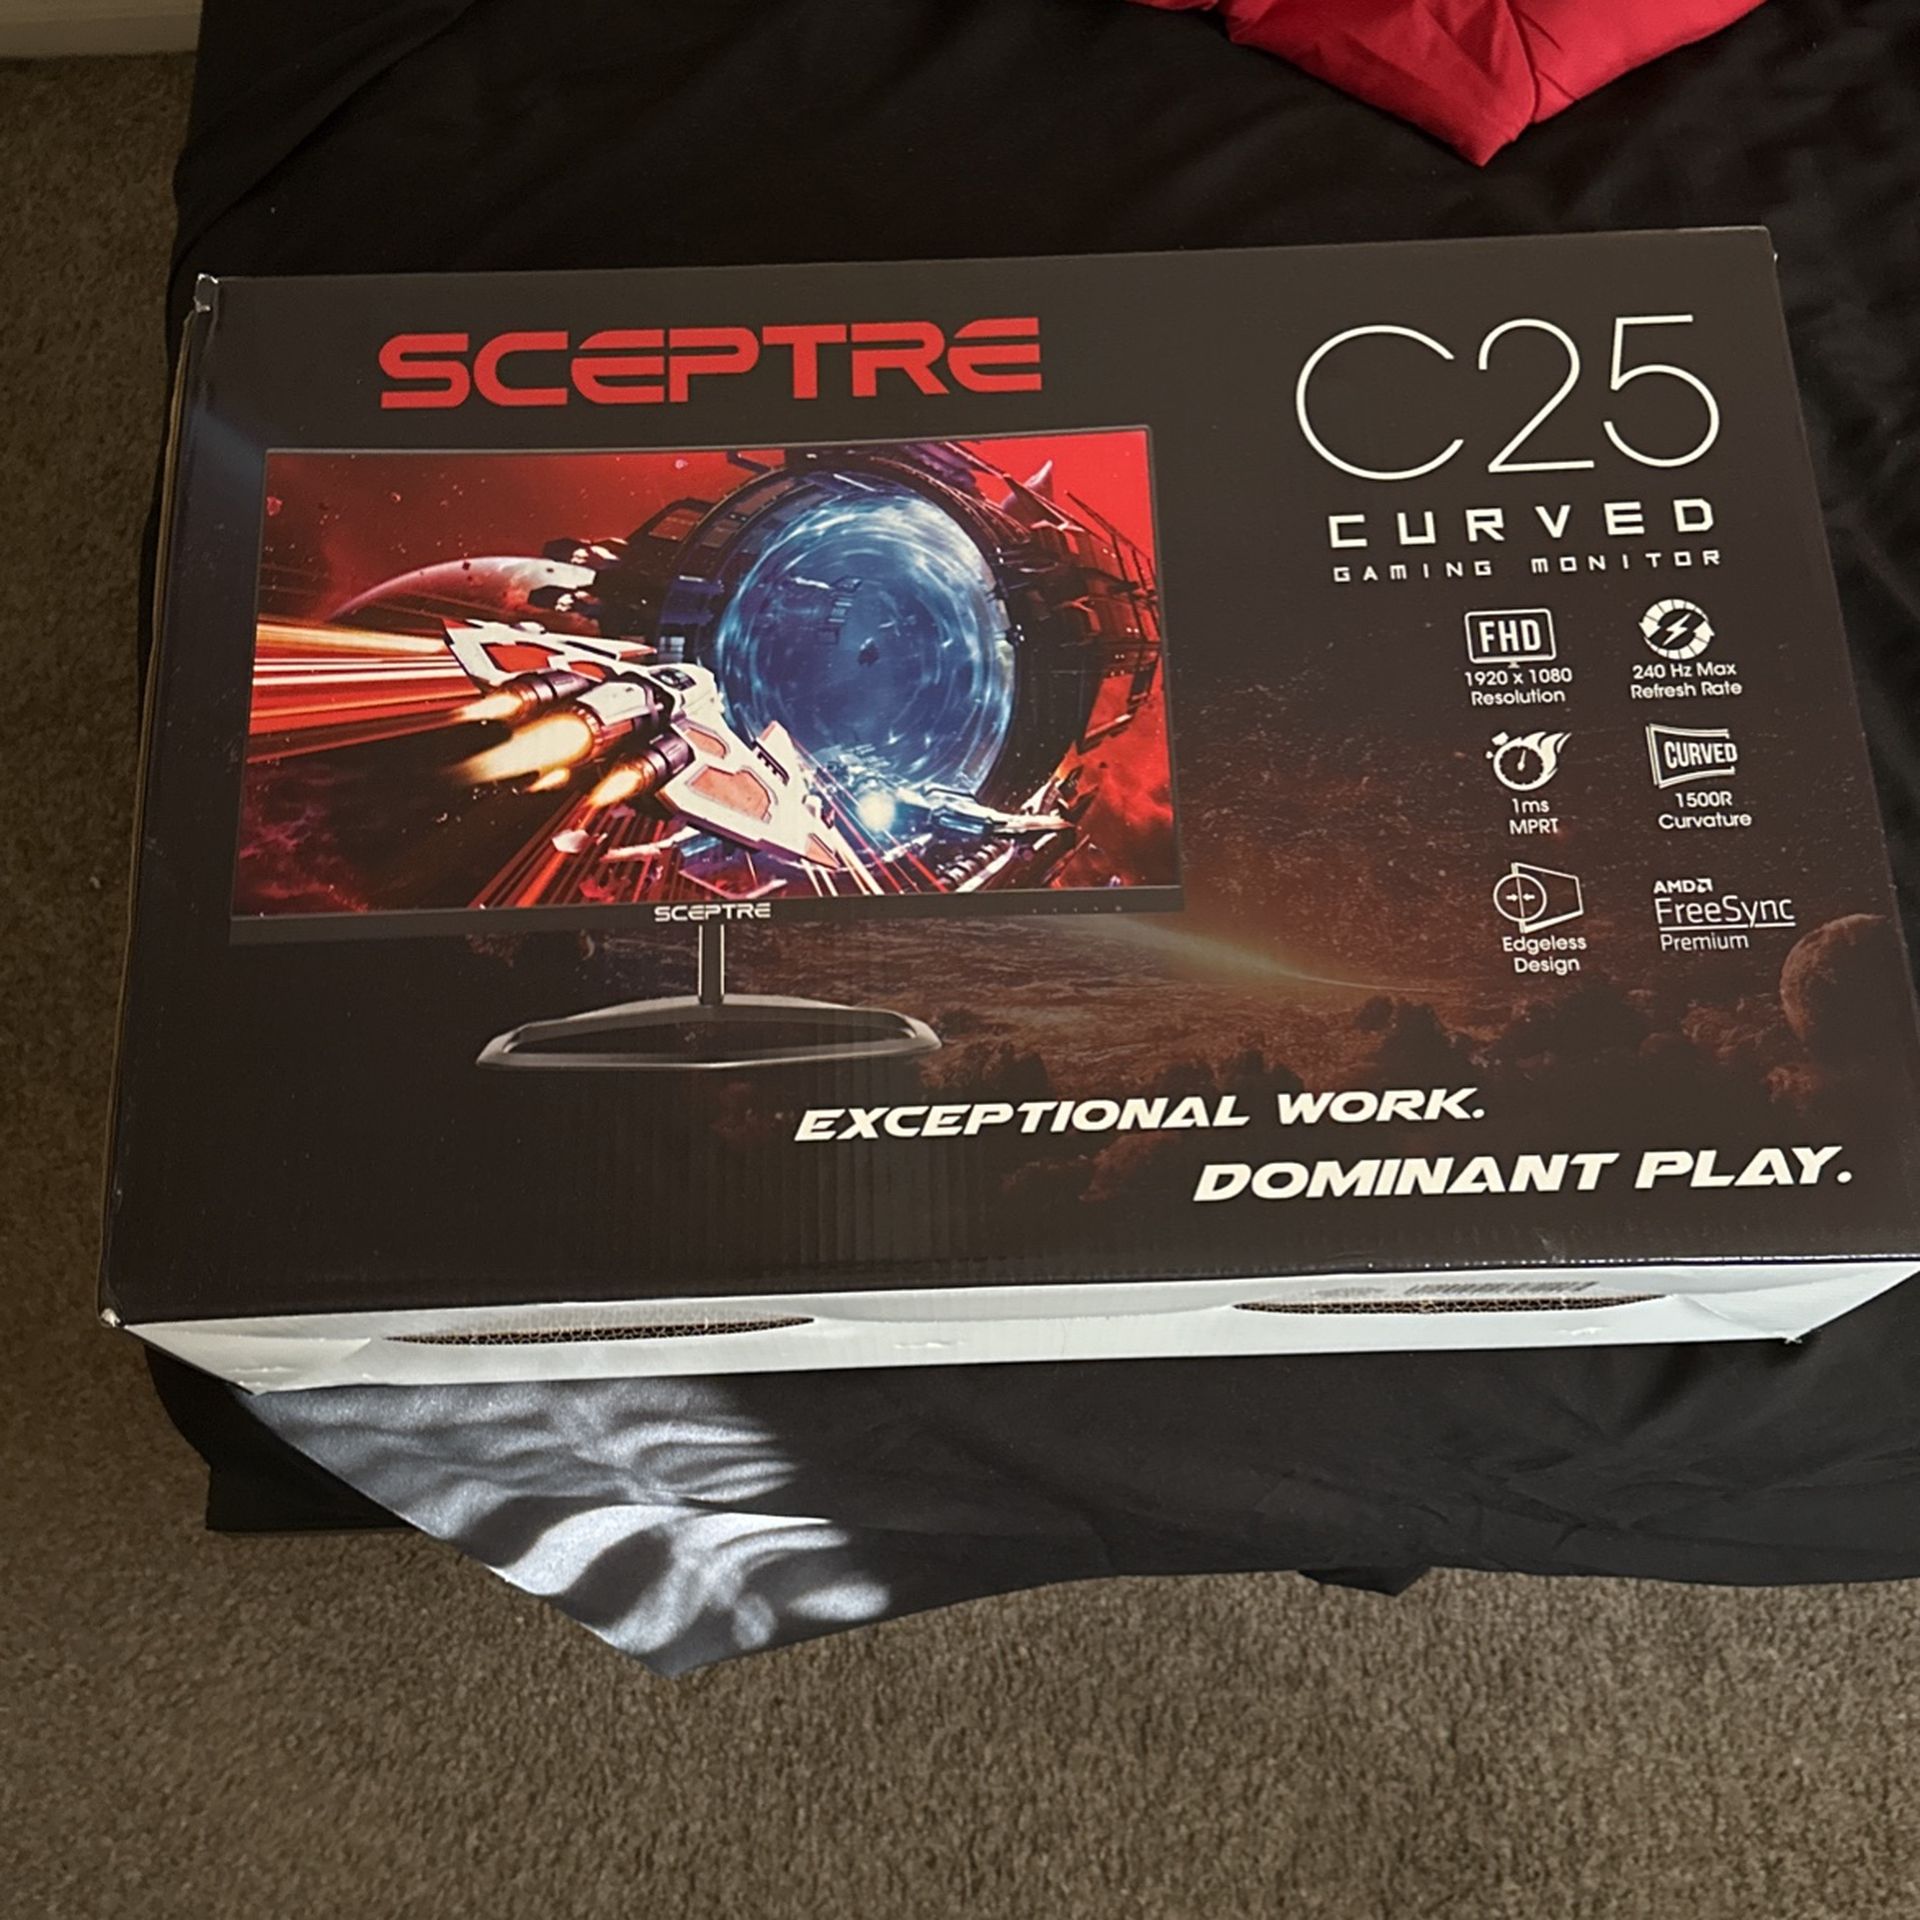 Spectre C25 Curved Gaming Monitor 